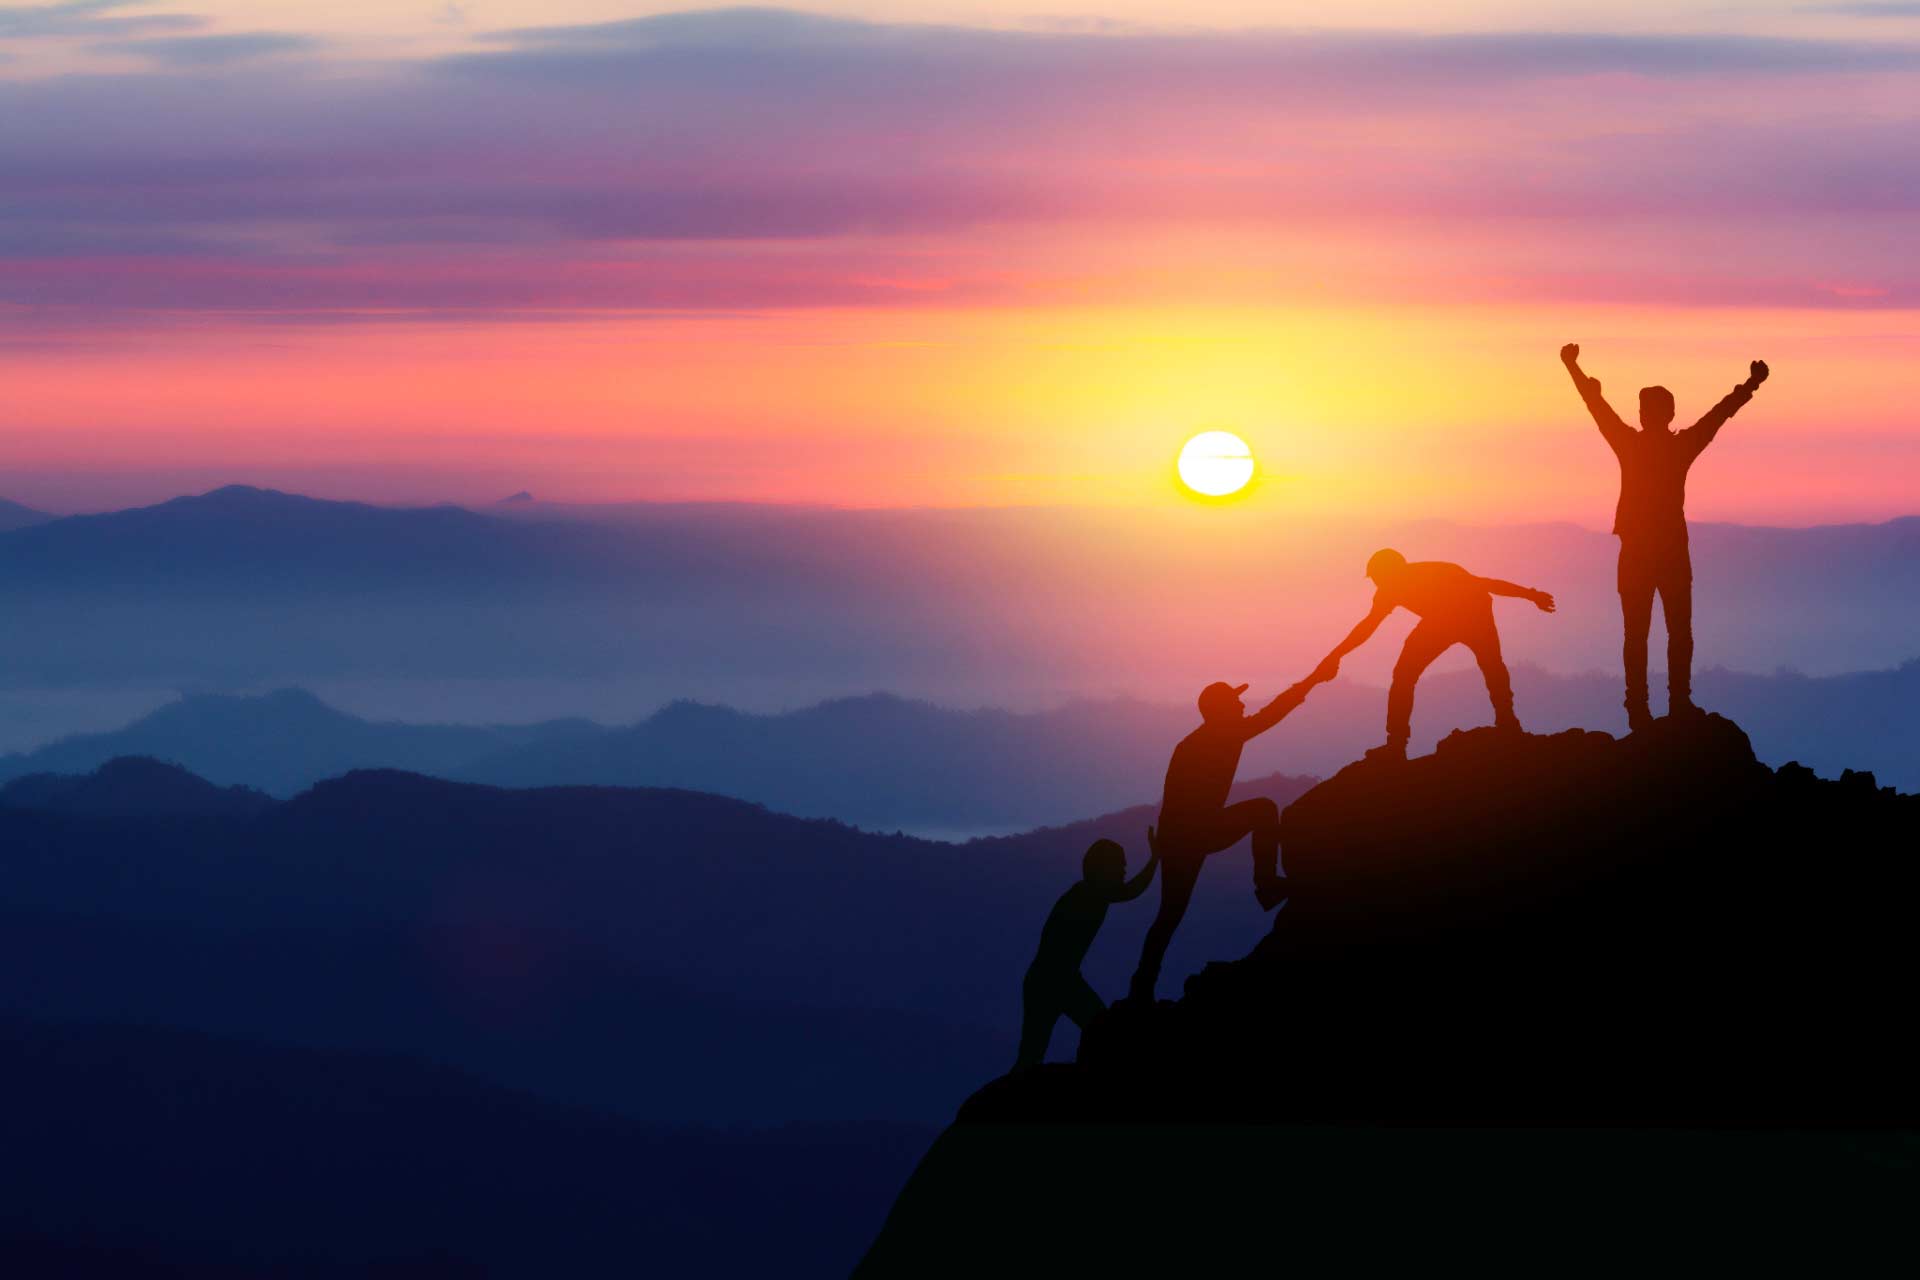 Silhouette of four people summiting a peak at sunrise.